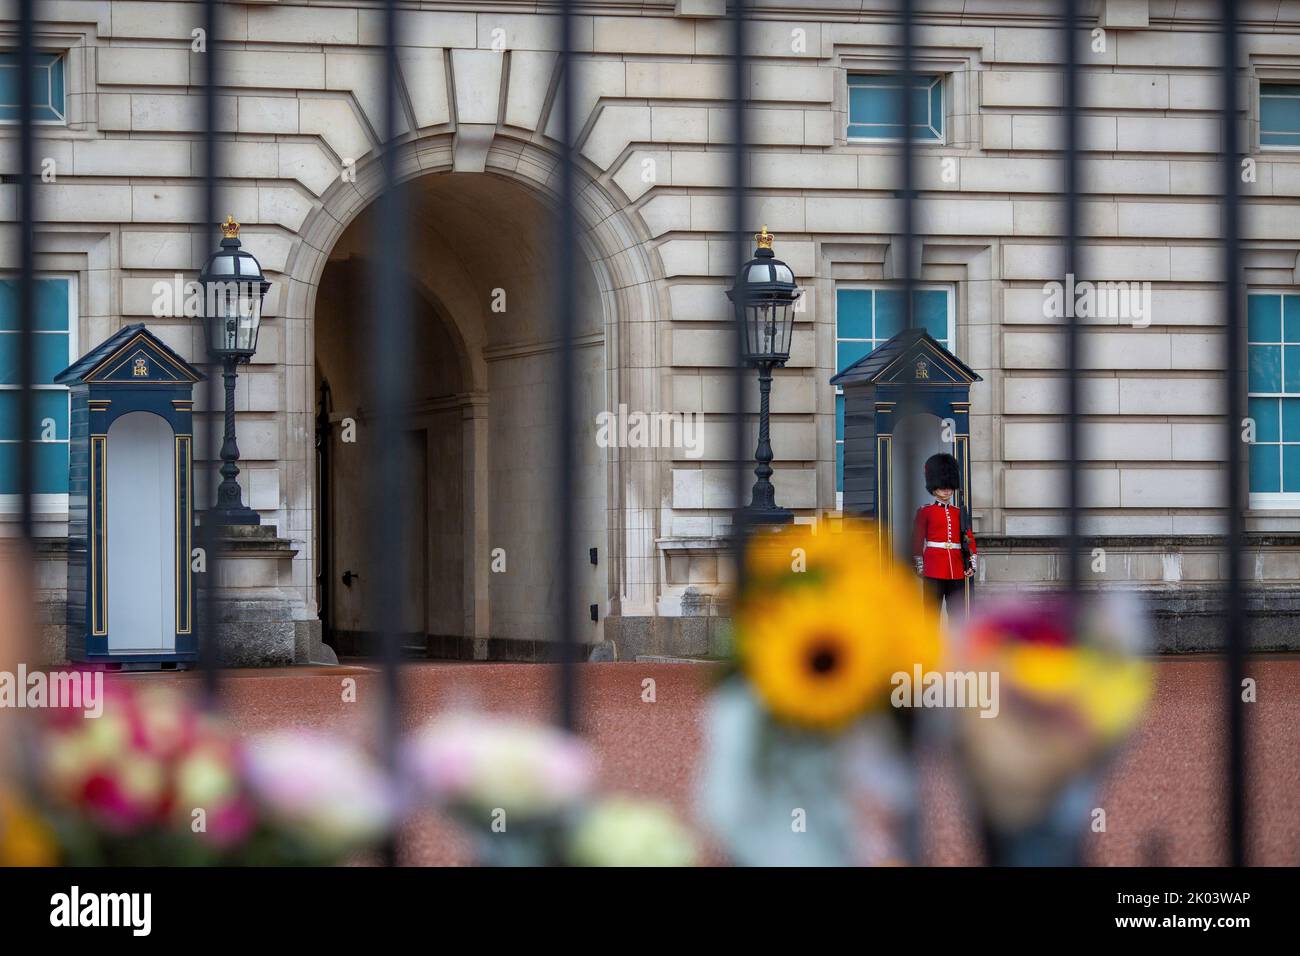 Buckingham Palace, London, UK – Friday 9th September 2022 – Soldiers stand guard behind the railings at Buckingham Palace which are now covered in flowers from the public as Britain mourns the death of Queen Elizabeth II. Photo Horst A. Friedrichs Alamy Live News Stock Photo